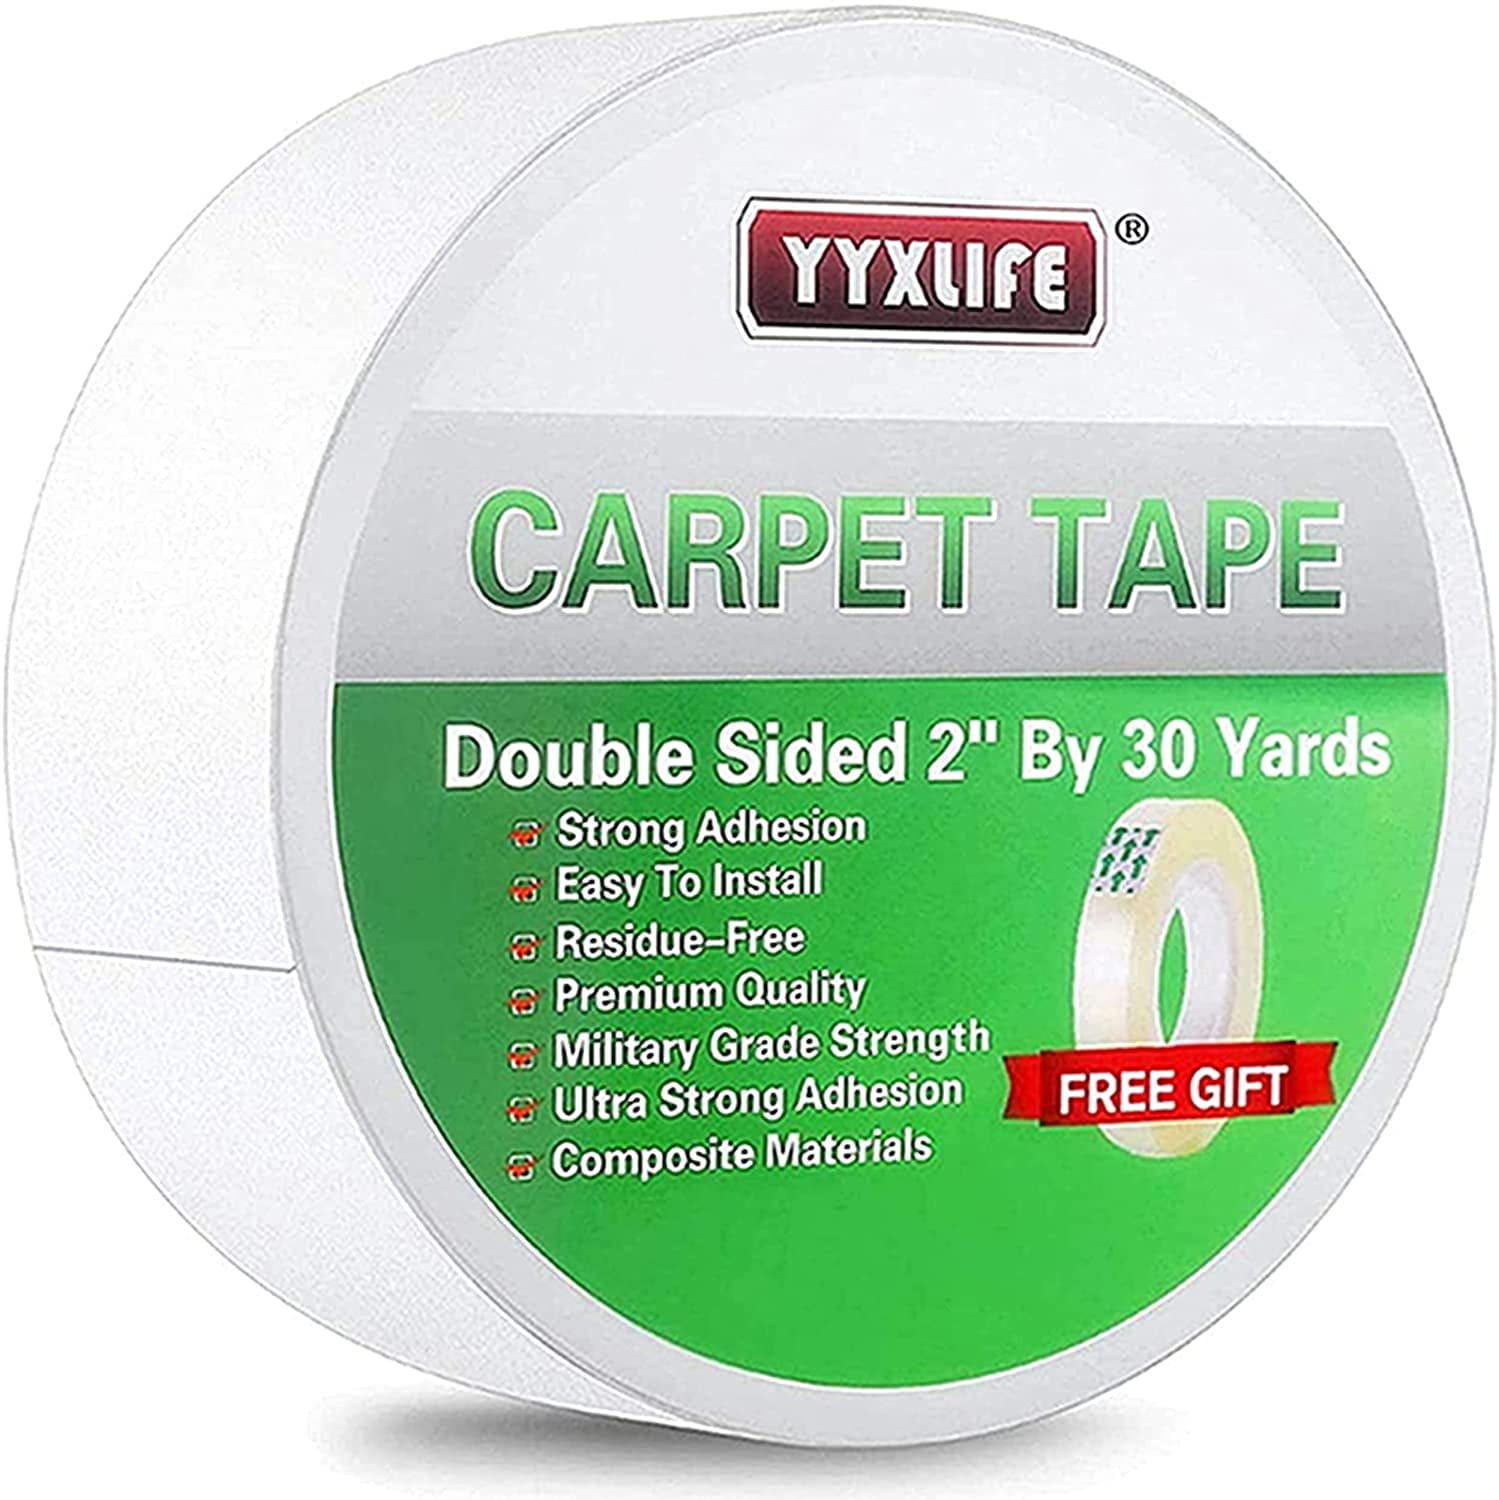 XFasten Double Sided Carpet Tape for Area Rugs and Carpets, Removable, 4  Inches x 30 Yards Super Strong and Heavy-Duty Rug Tape for Carpet to Floor